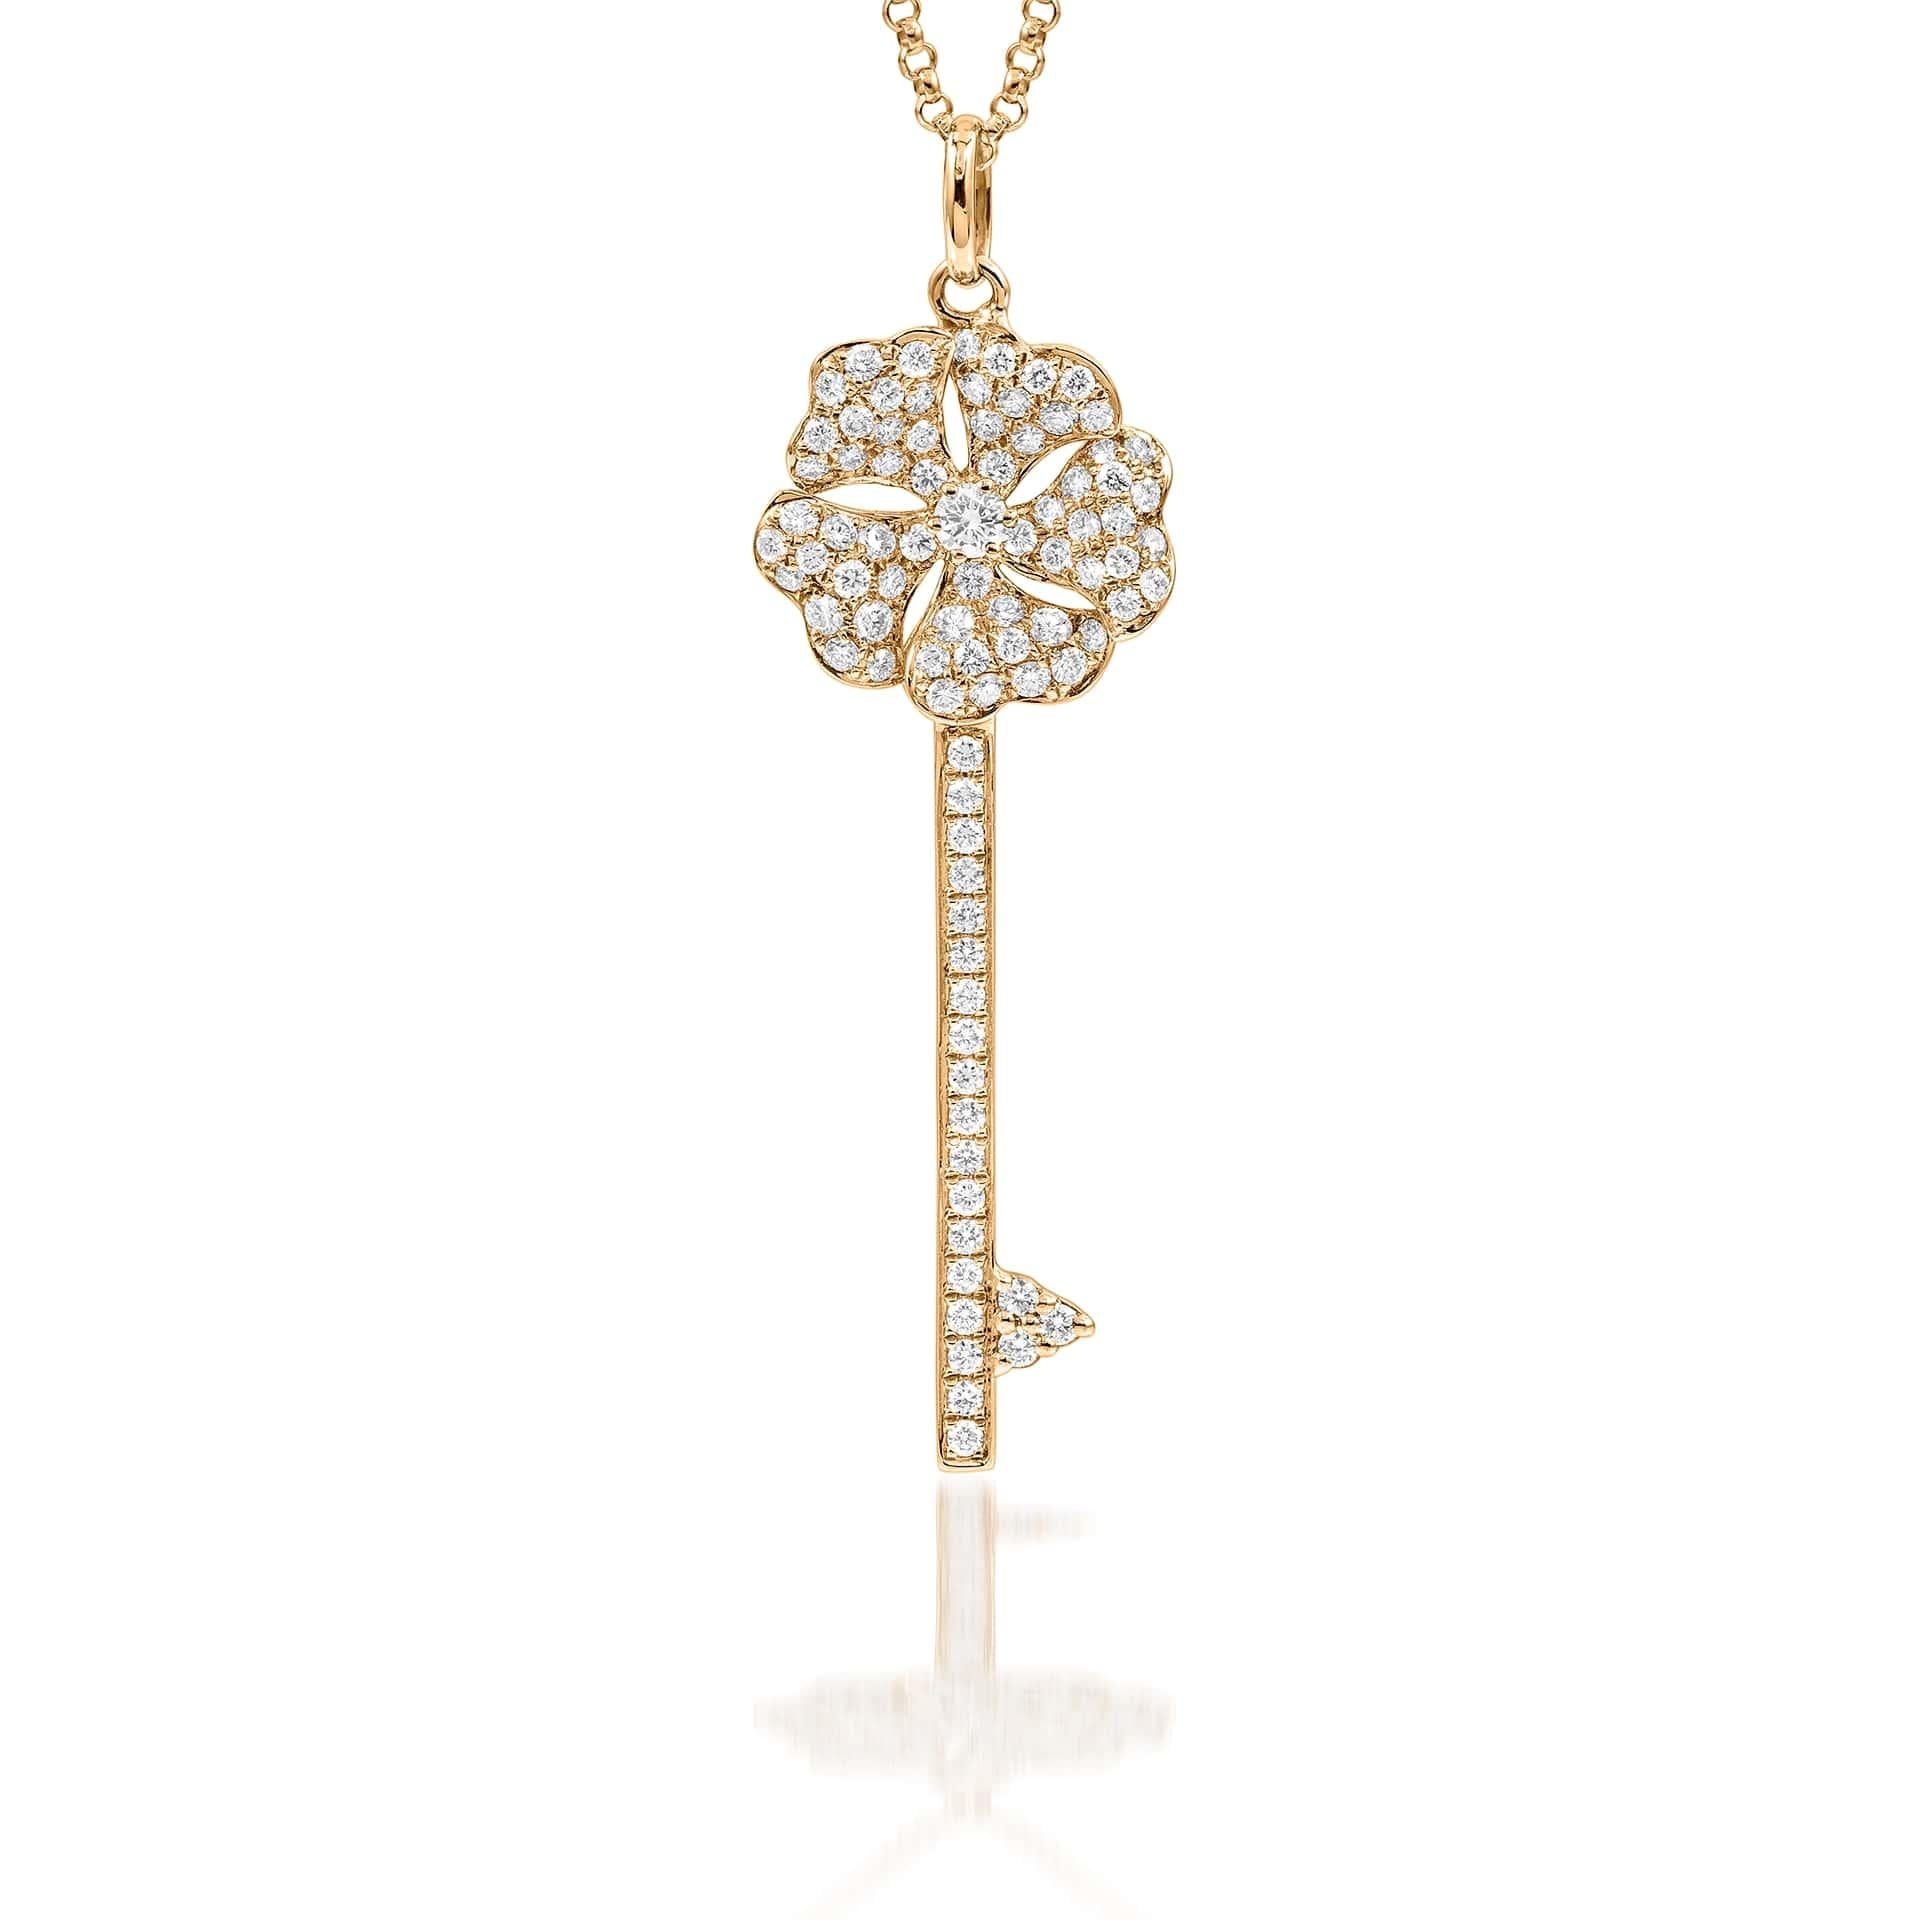 Bloom Diamond Key Necklace in 18K Yellow Gold

Inspired by the exquisite petals of the alpine cinquefoil flower, the Bloom collection combines the richness of diamonds and precious metals with the light versatility of this delicate, five-pointed